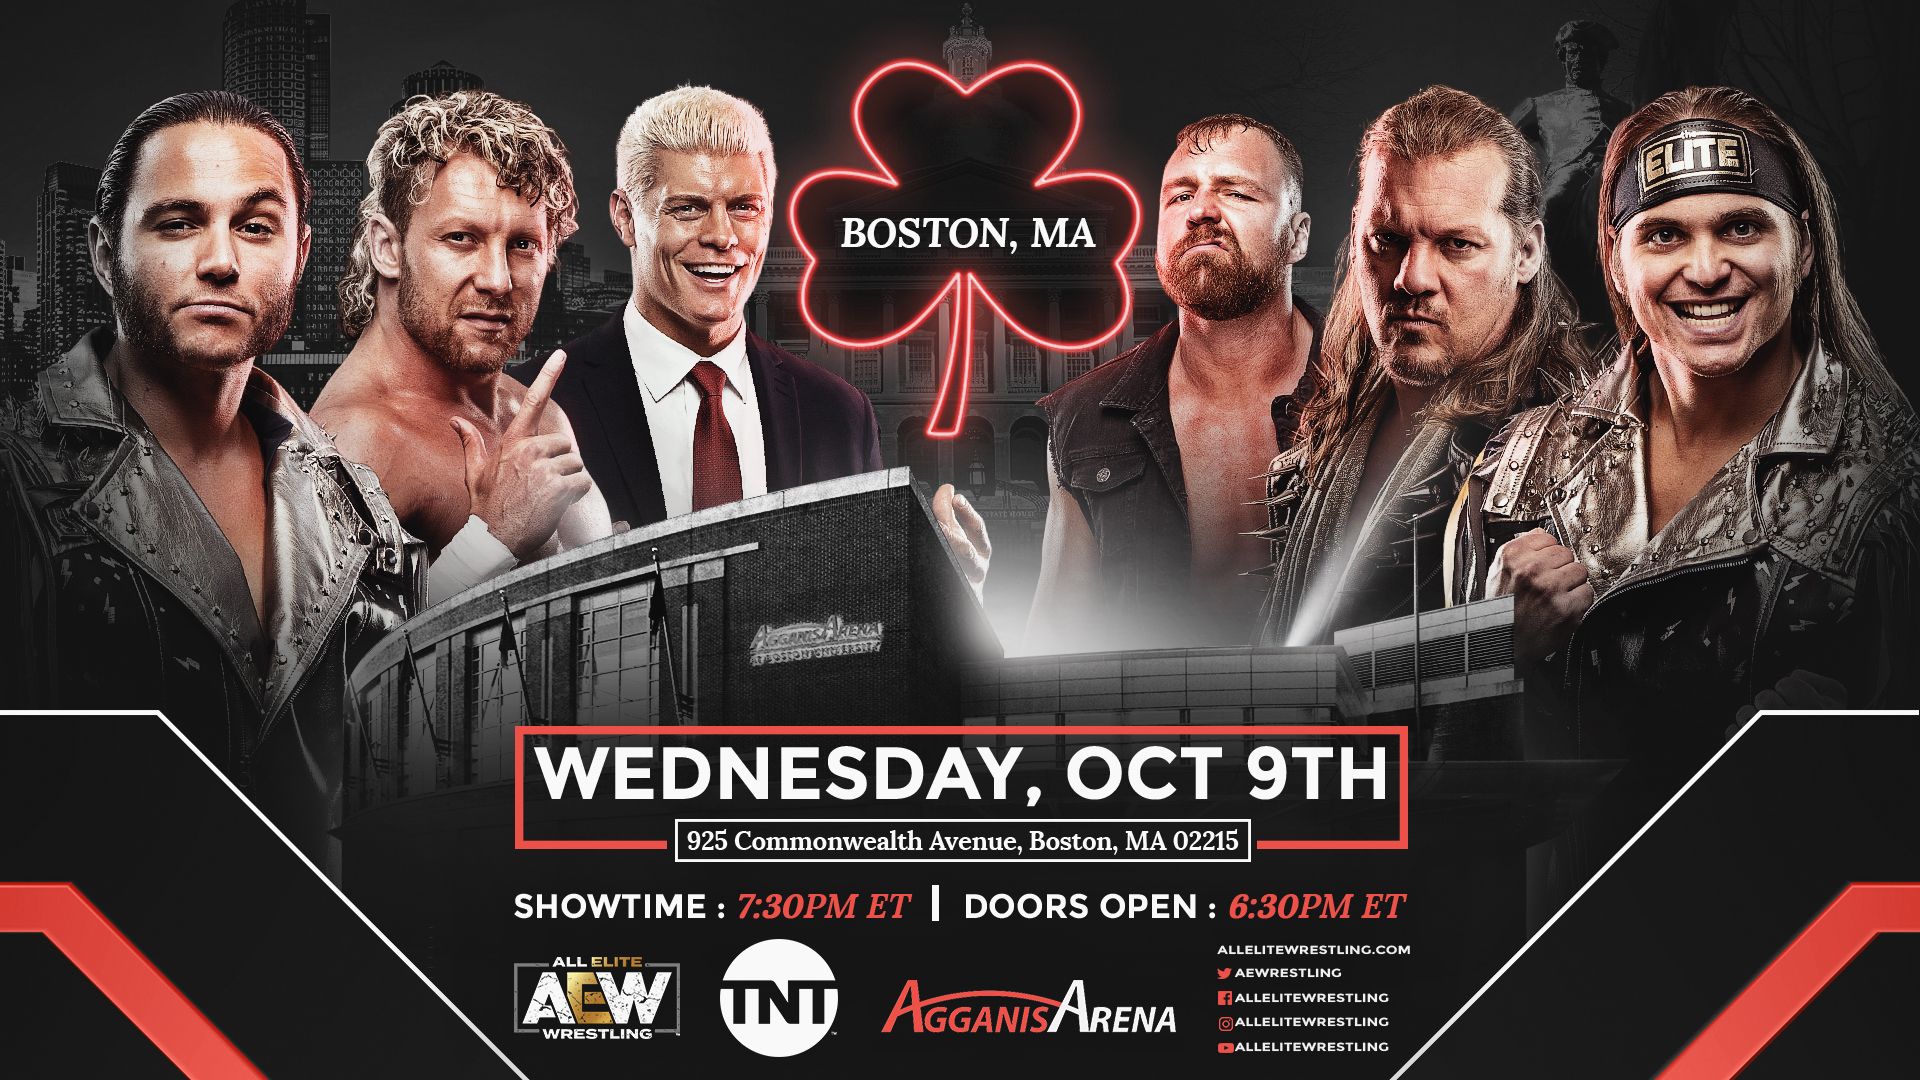 AEW Announces Locations for Their Second and Third TNT Shows TPWW